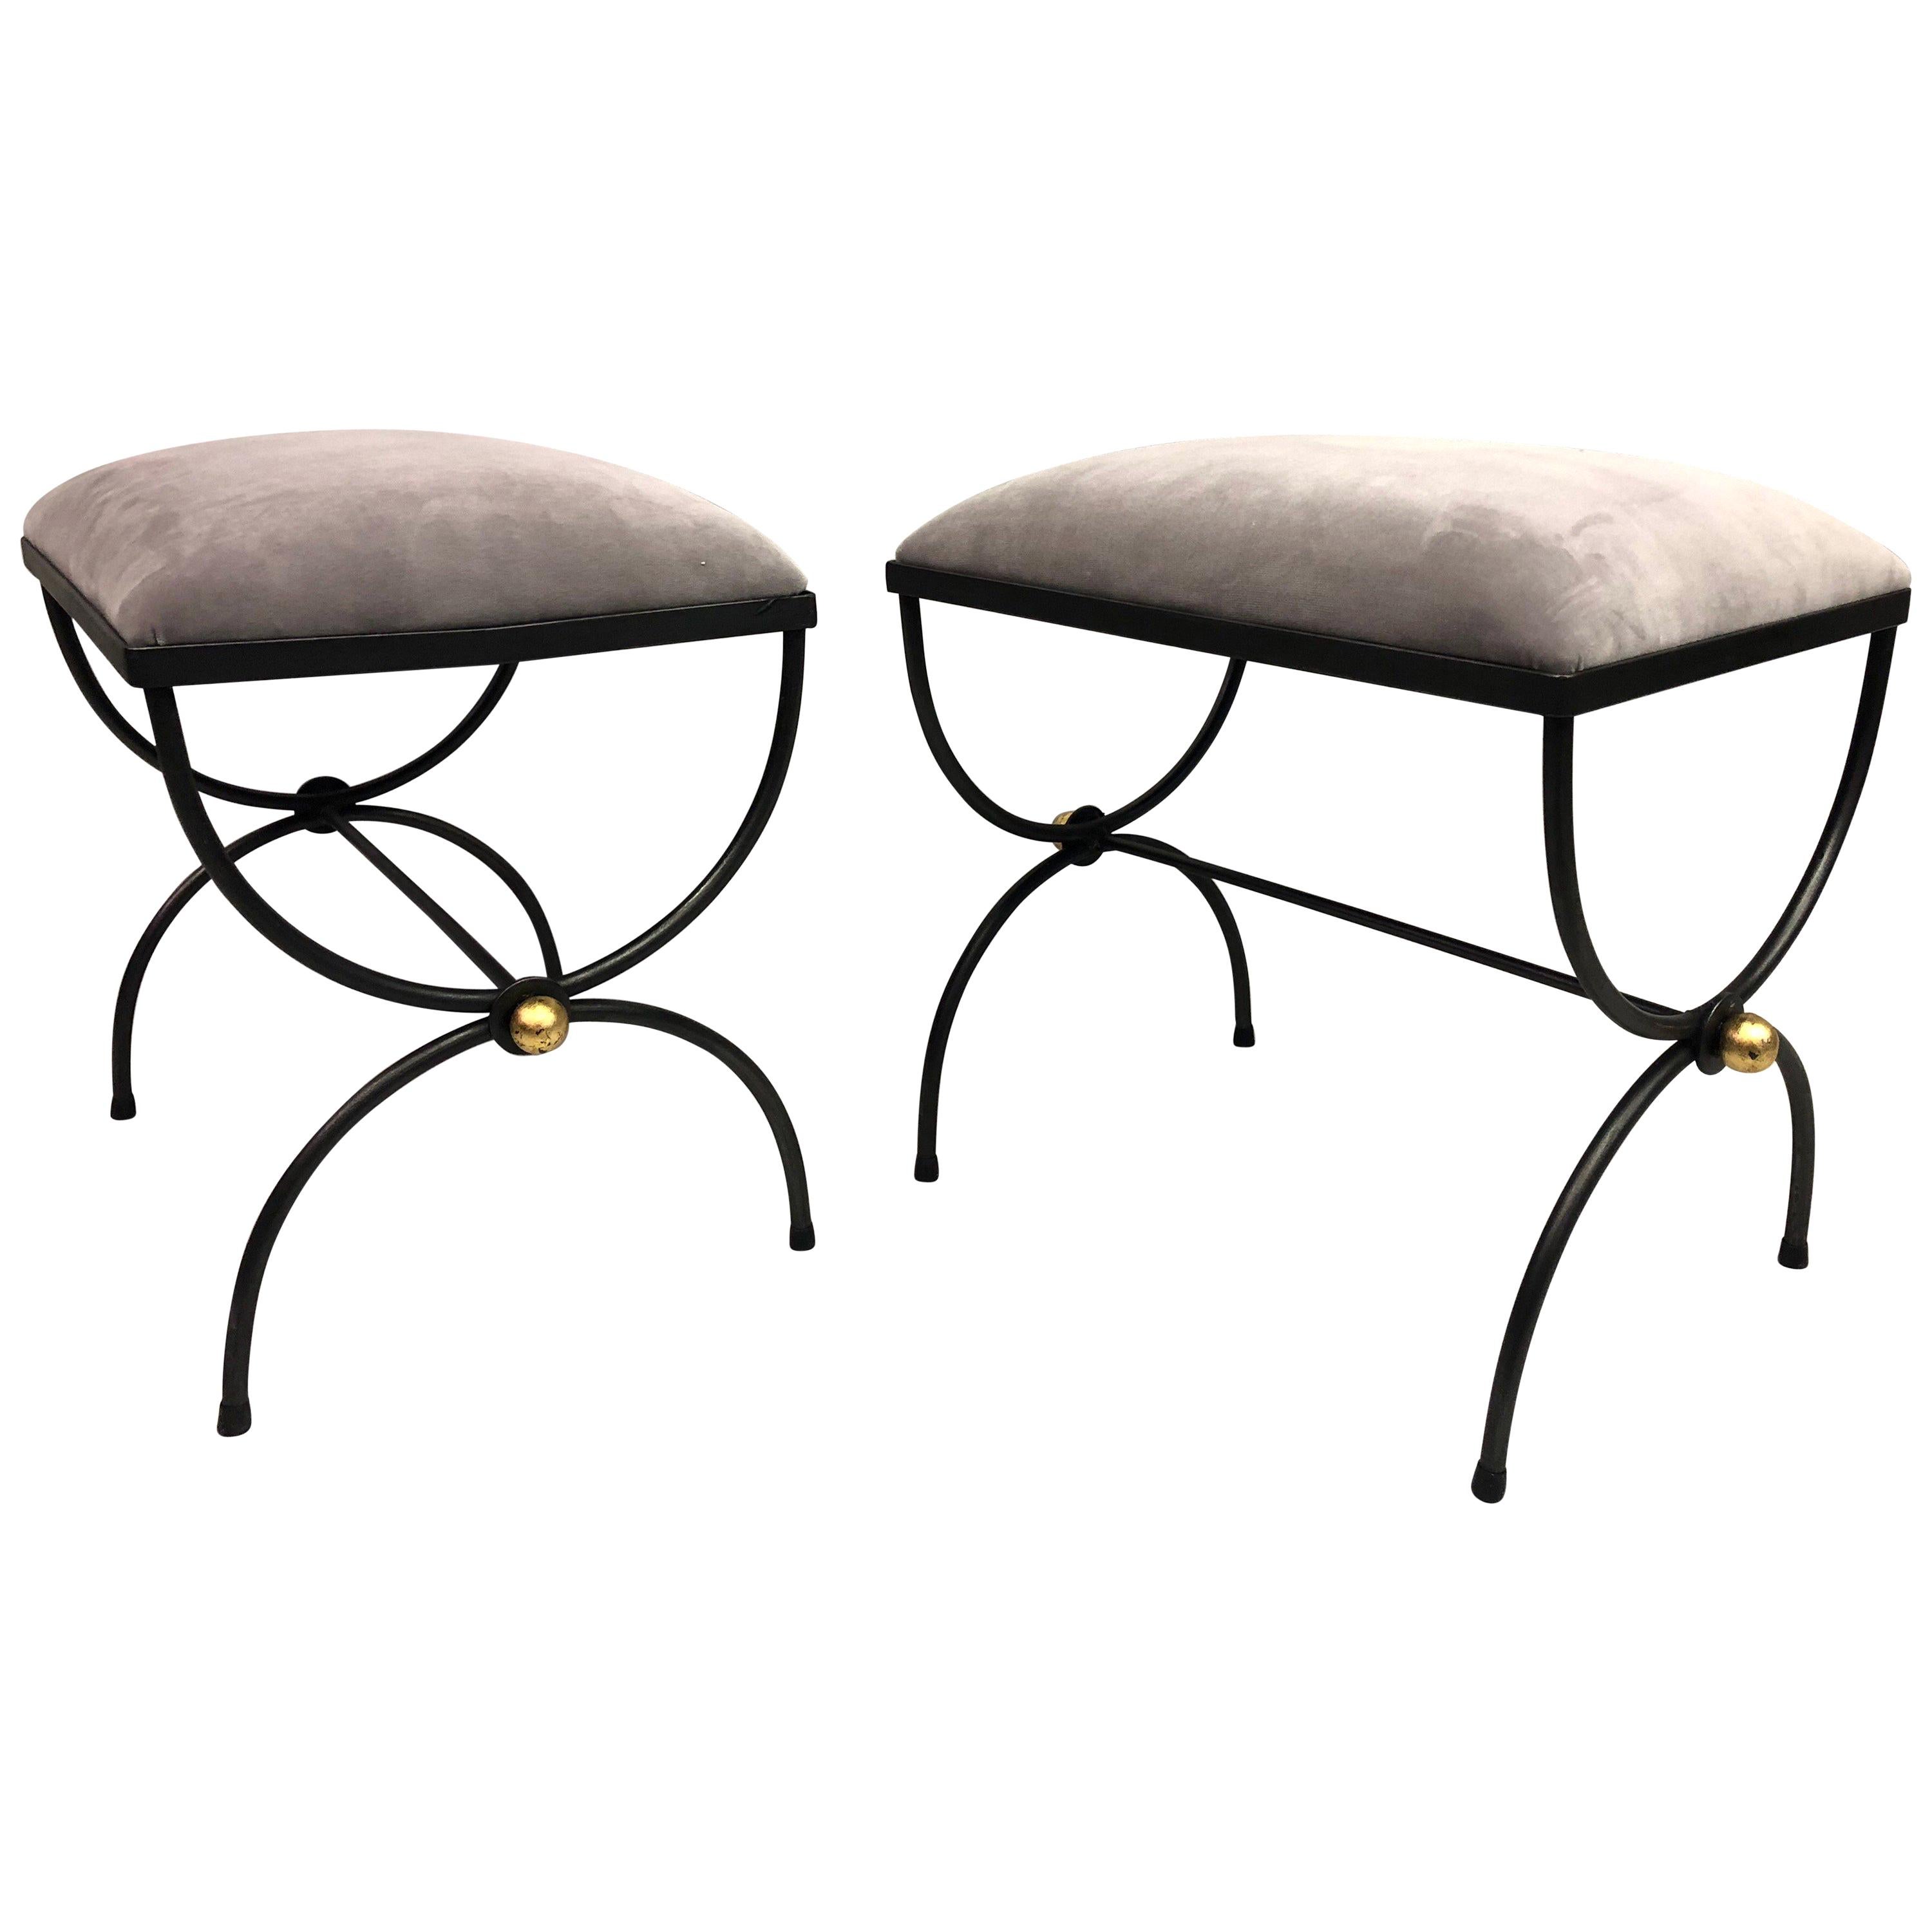 Pair of Mid-Century Modern Neoclassical Wrought Iron and Gilt Benches or Stools